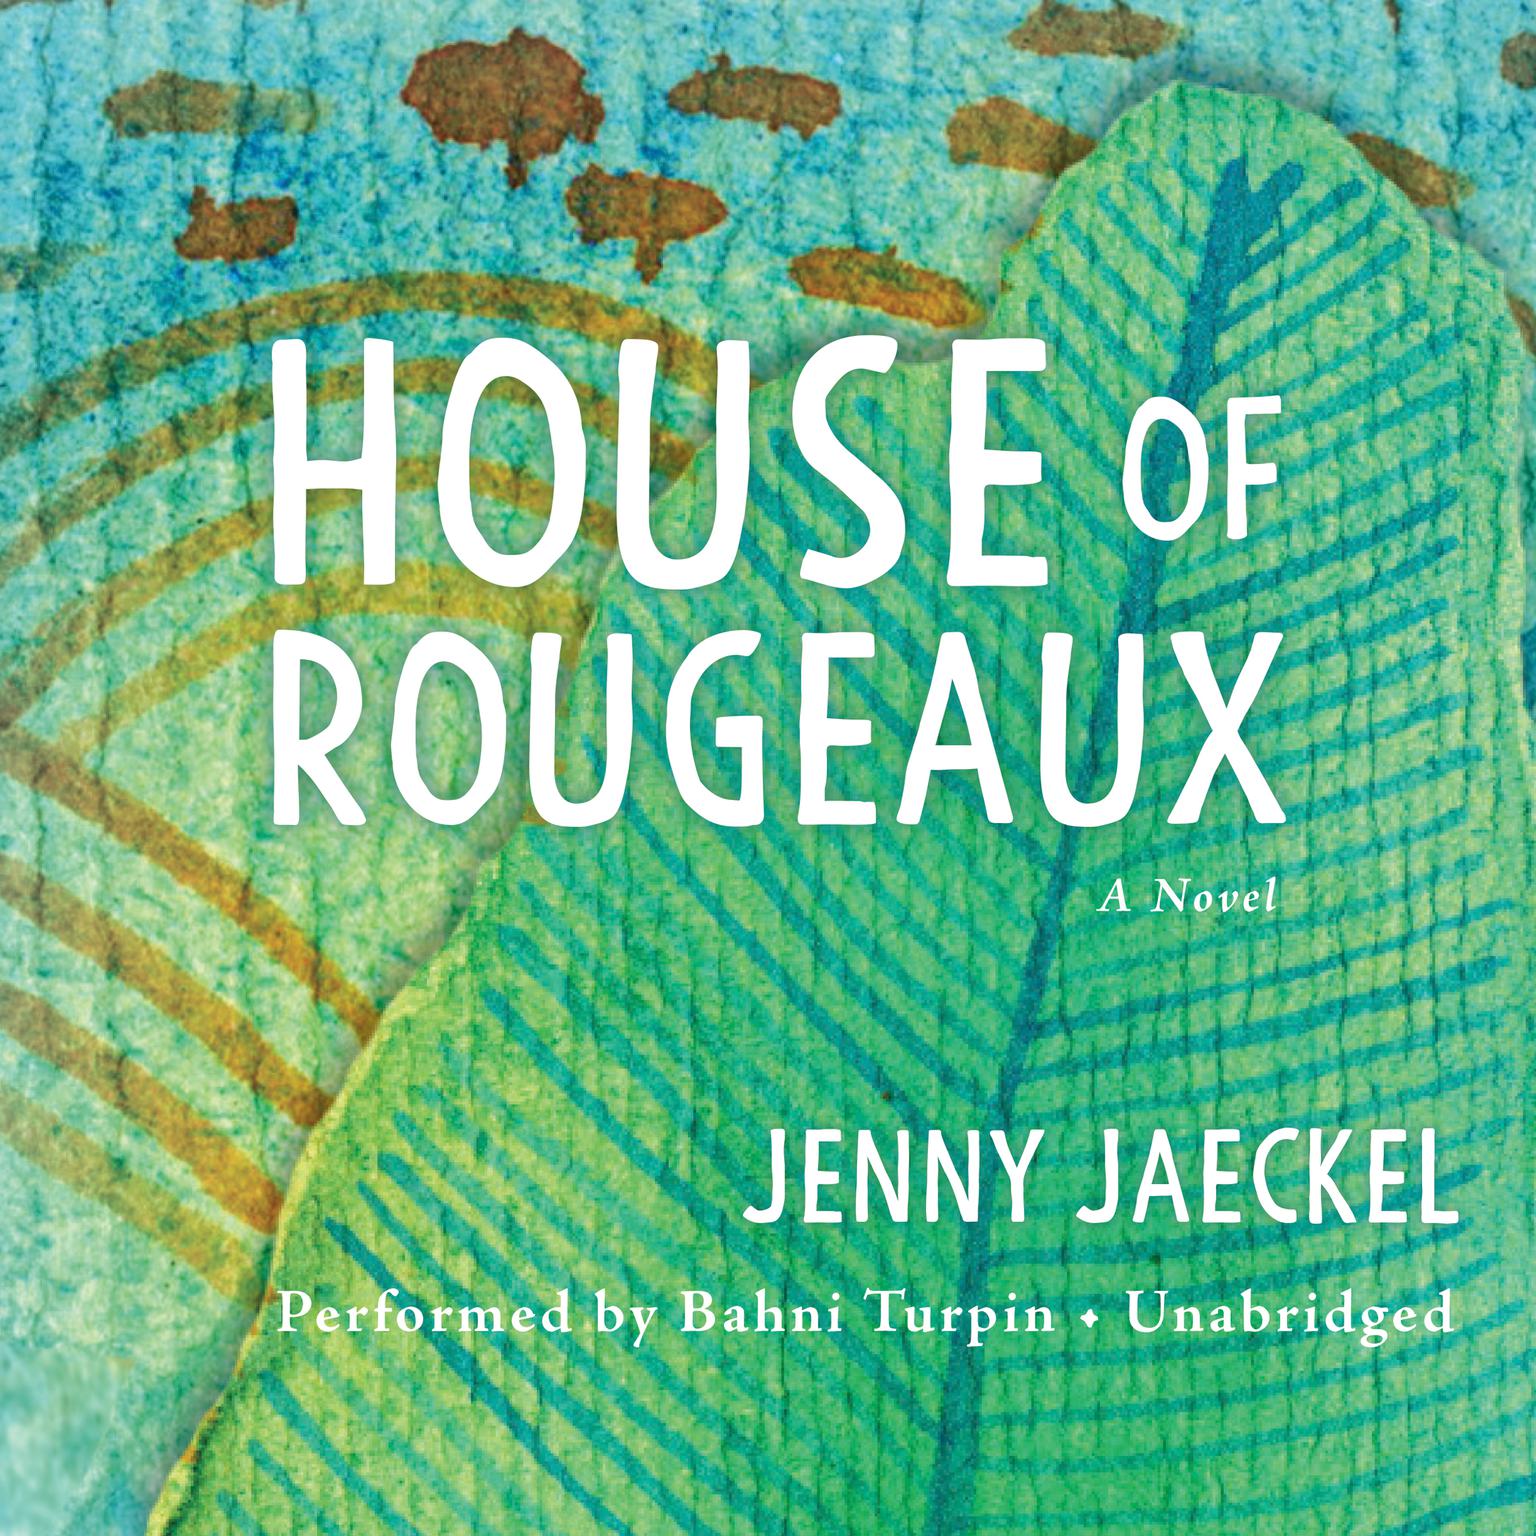 House of Rougeaux: A Novel Audiobook, by Jenny Jaeckel